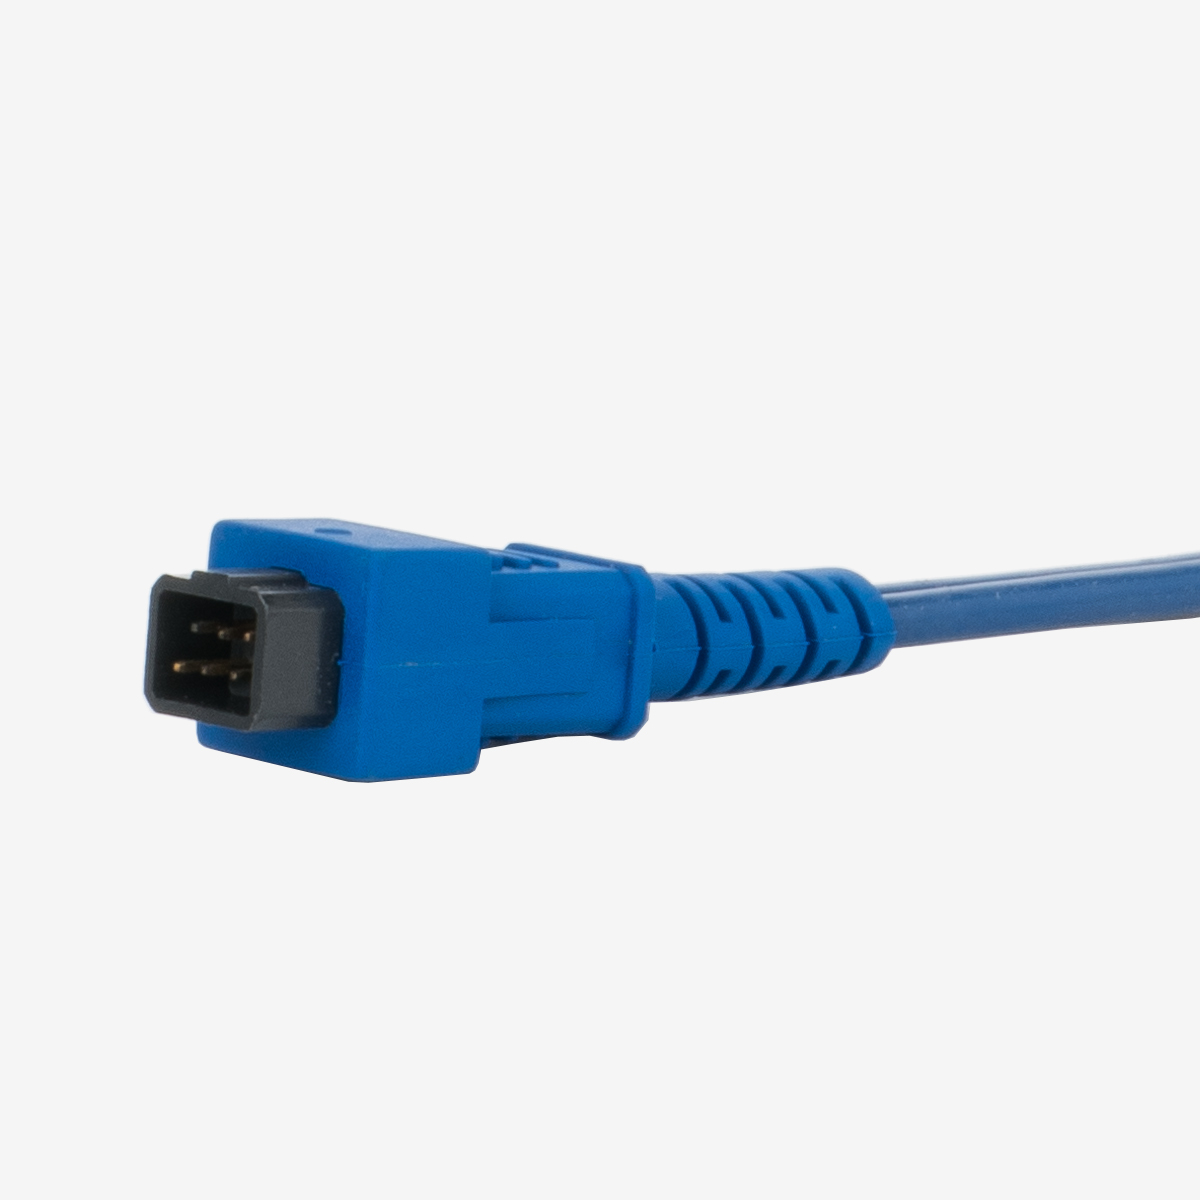 Side angle view of square blue connector on extension cable